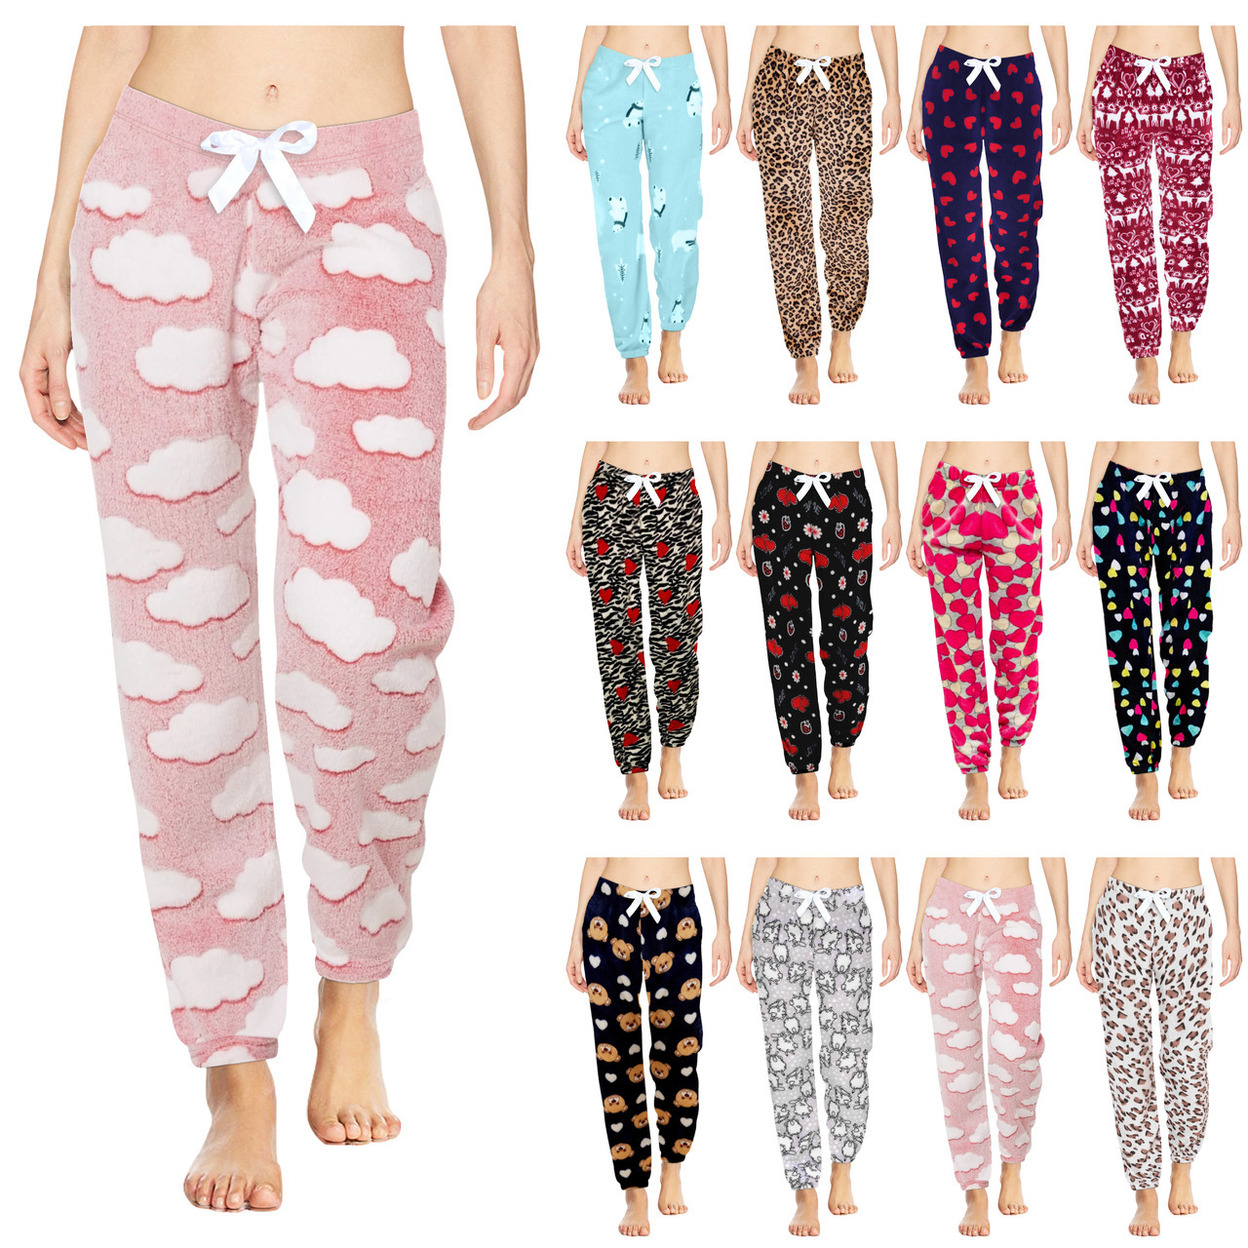 Multi-Pack: Women's Printed Ultra-Soft Comfy Stretch Micro-Fleece Pajama Lounge Pants - 3-pack, Love, X-large